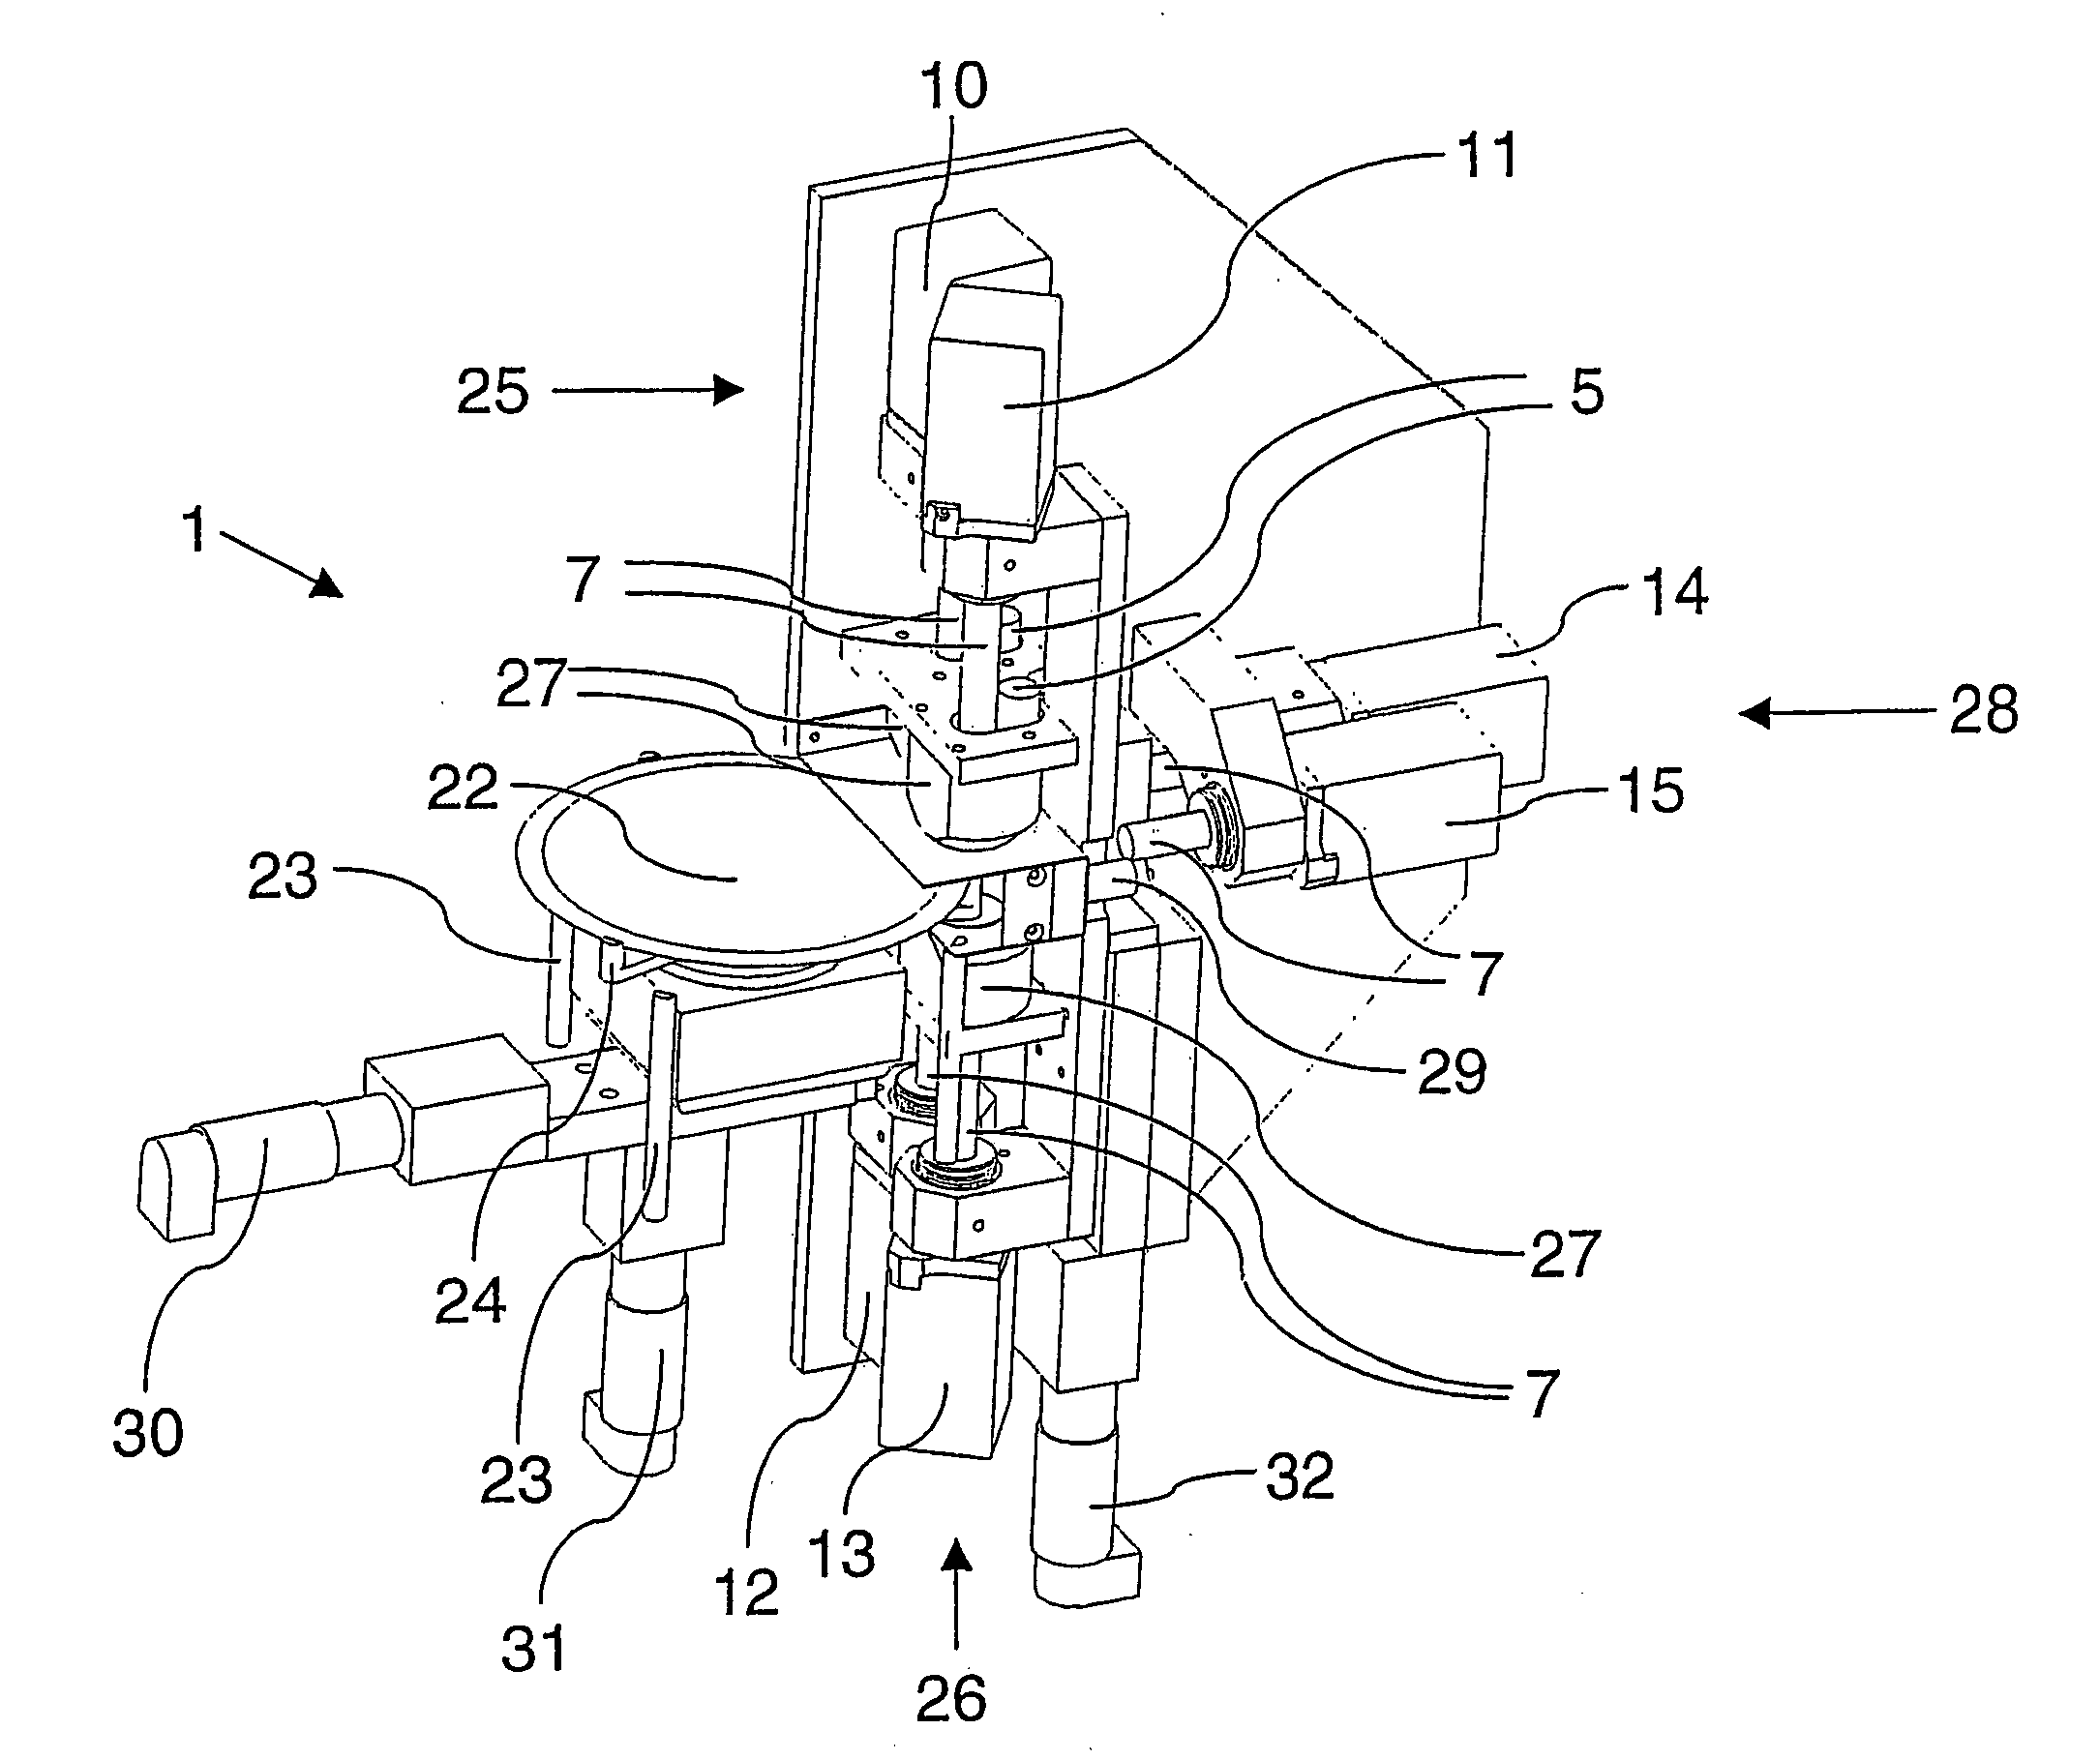 Method and apparatus for optically controlling the quality of objects having a circular edge